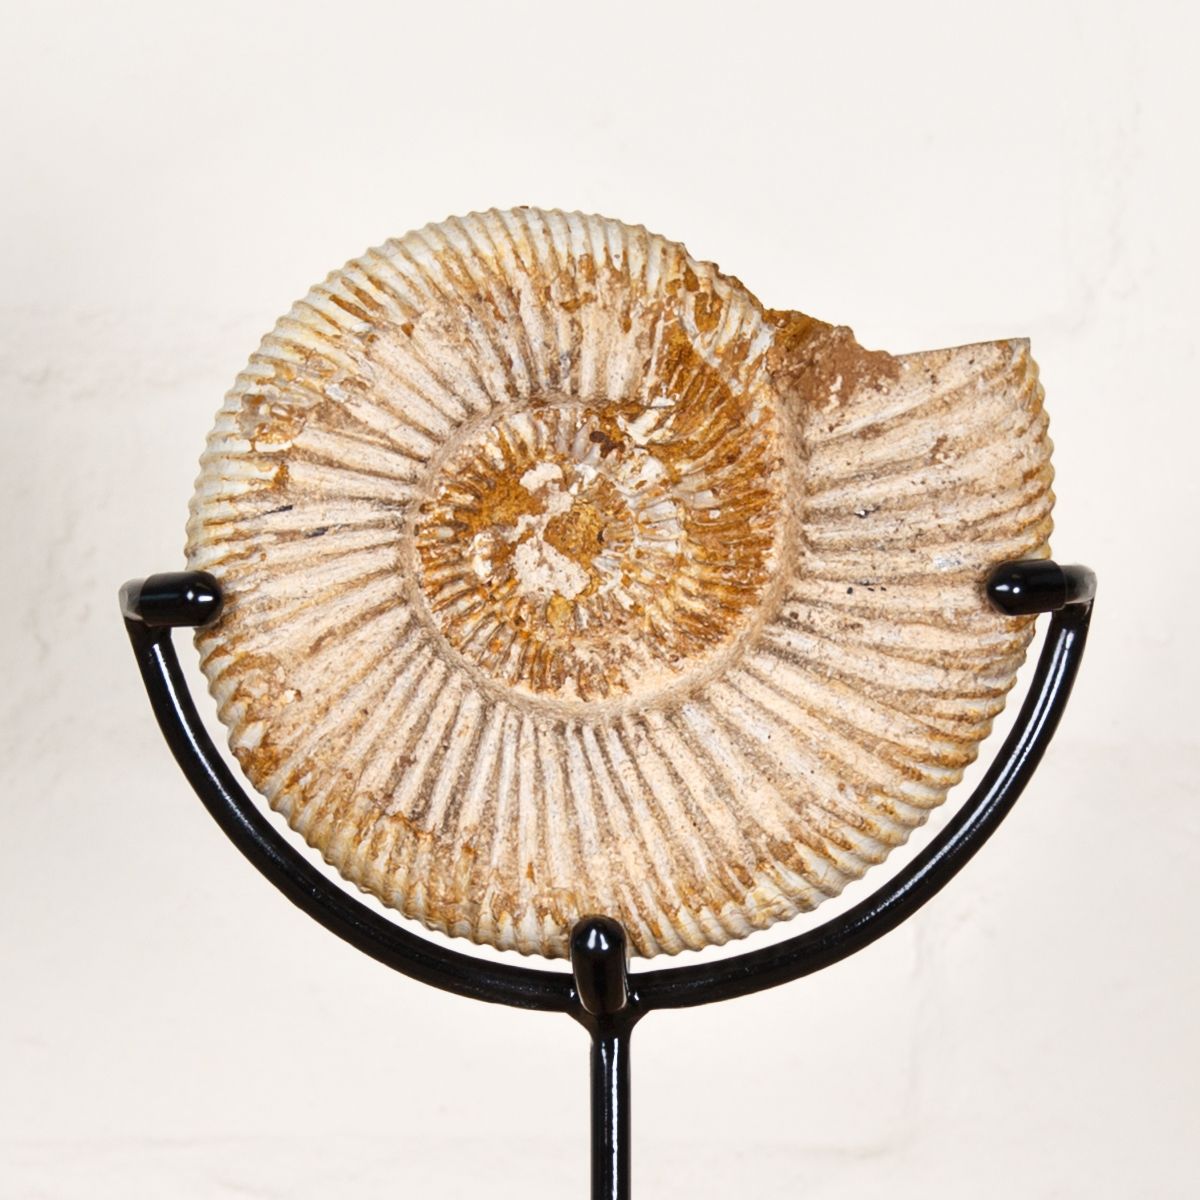 5.1 inch White Spine Ammonite Fossil on Stand (Cleoniceras sp)